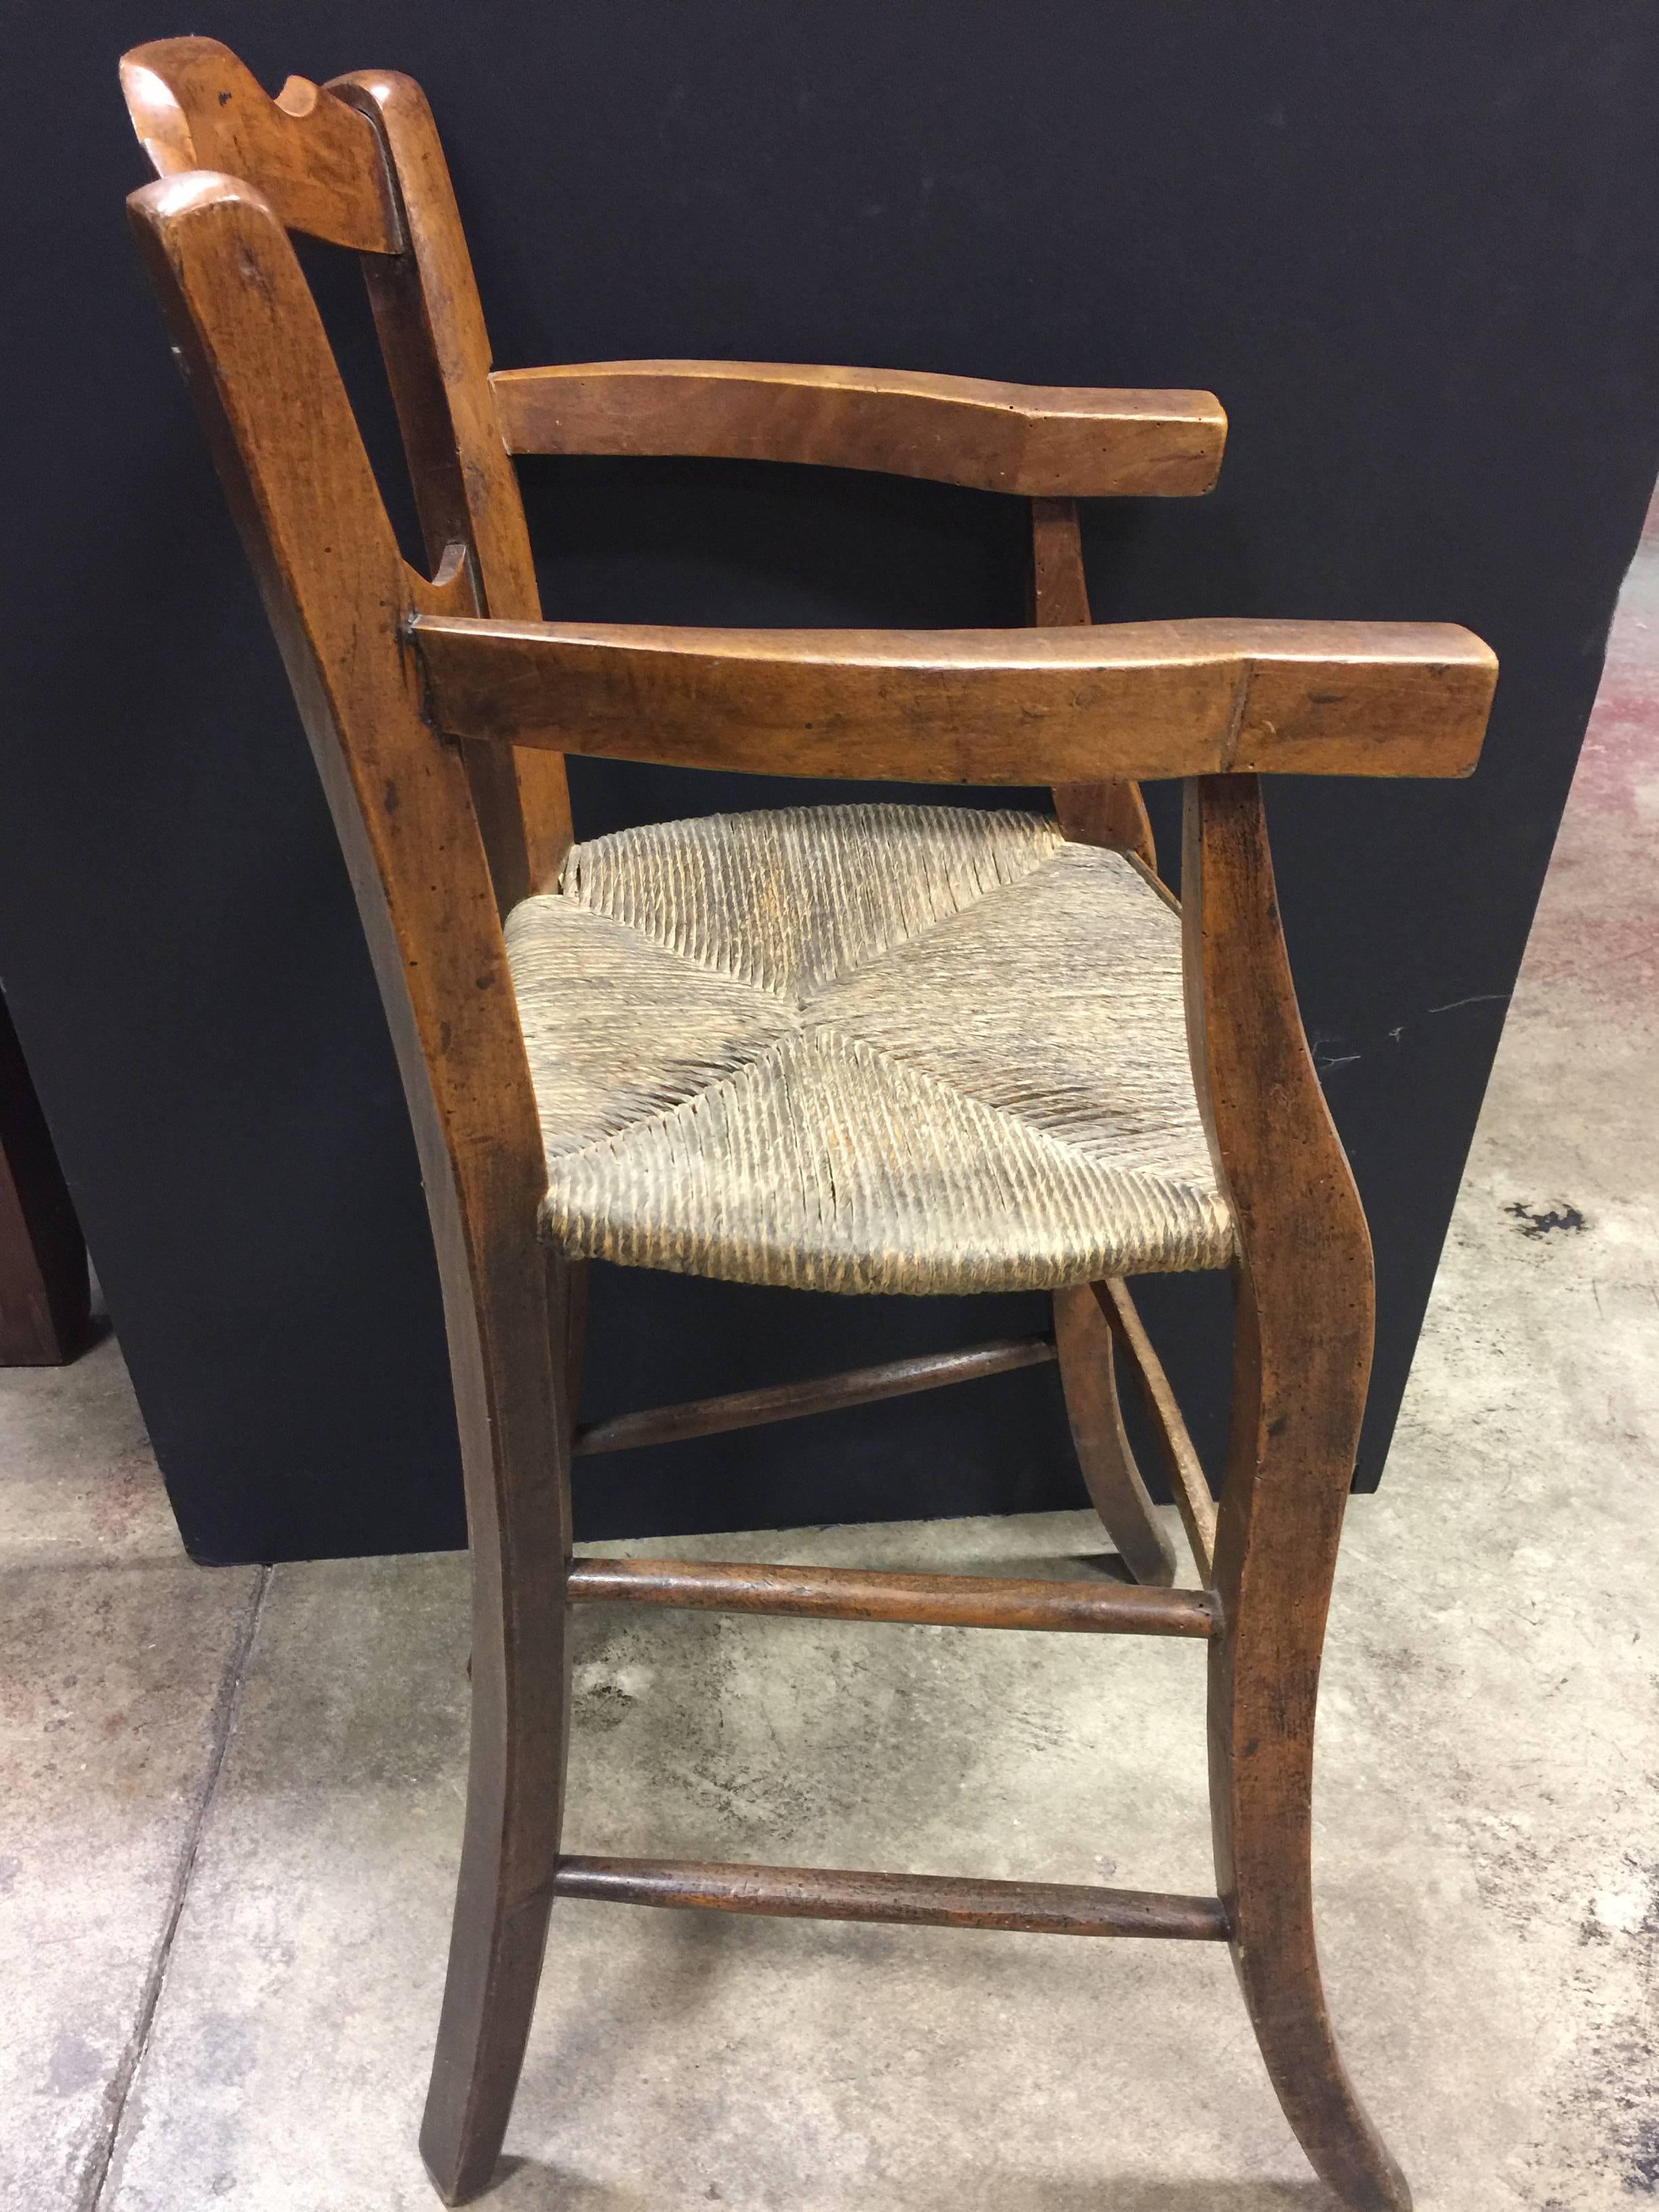 19th century French fruitwood child’s highchair.
Not original rush seat.
Childs chair.